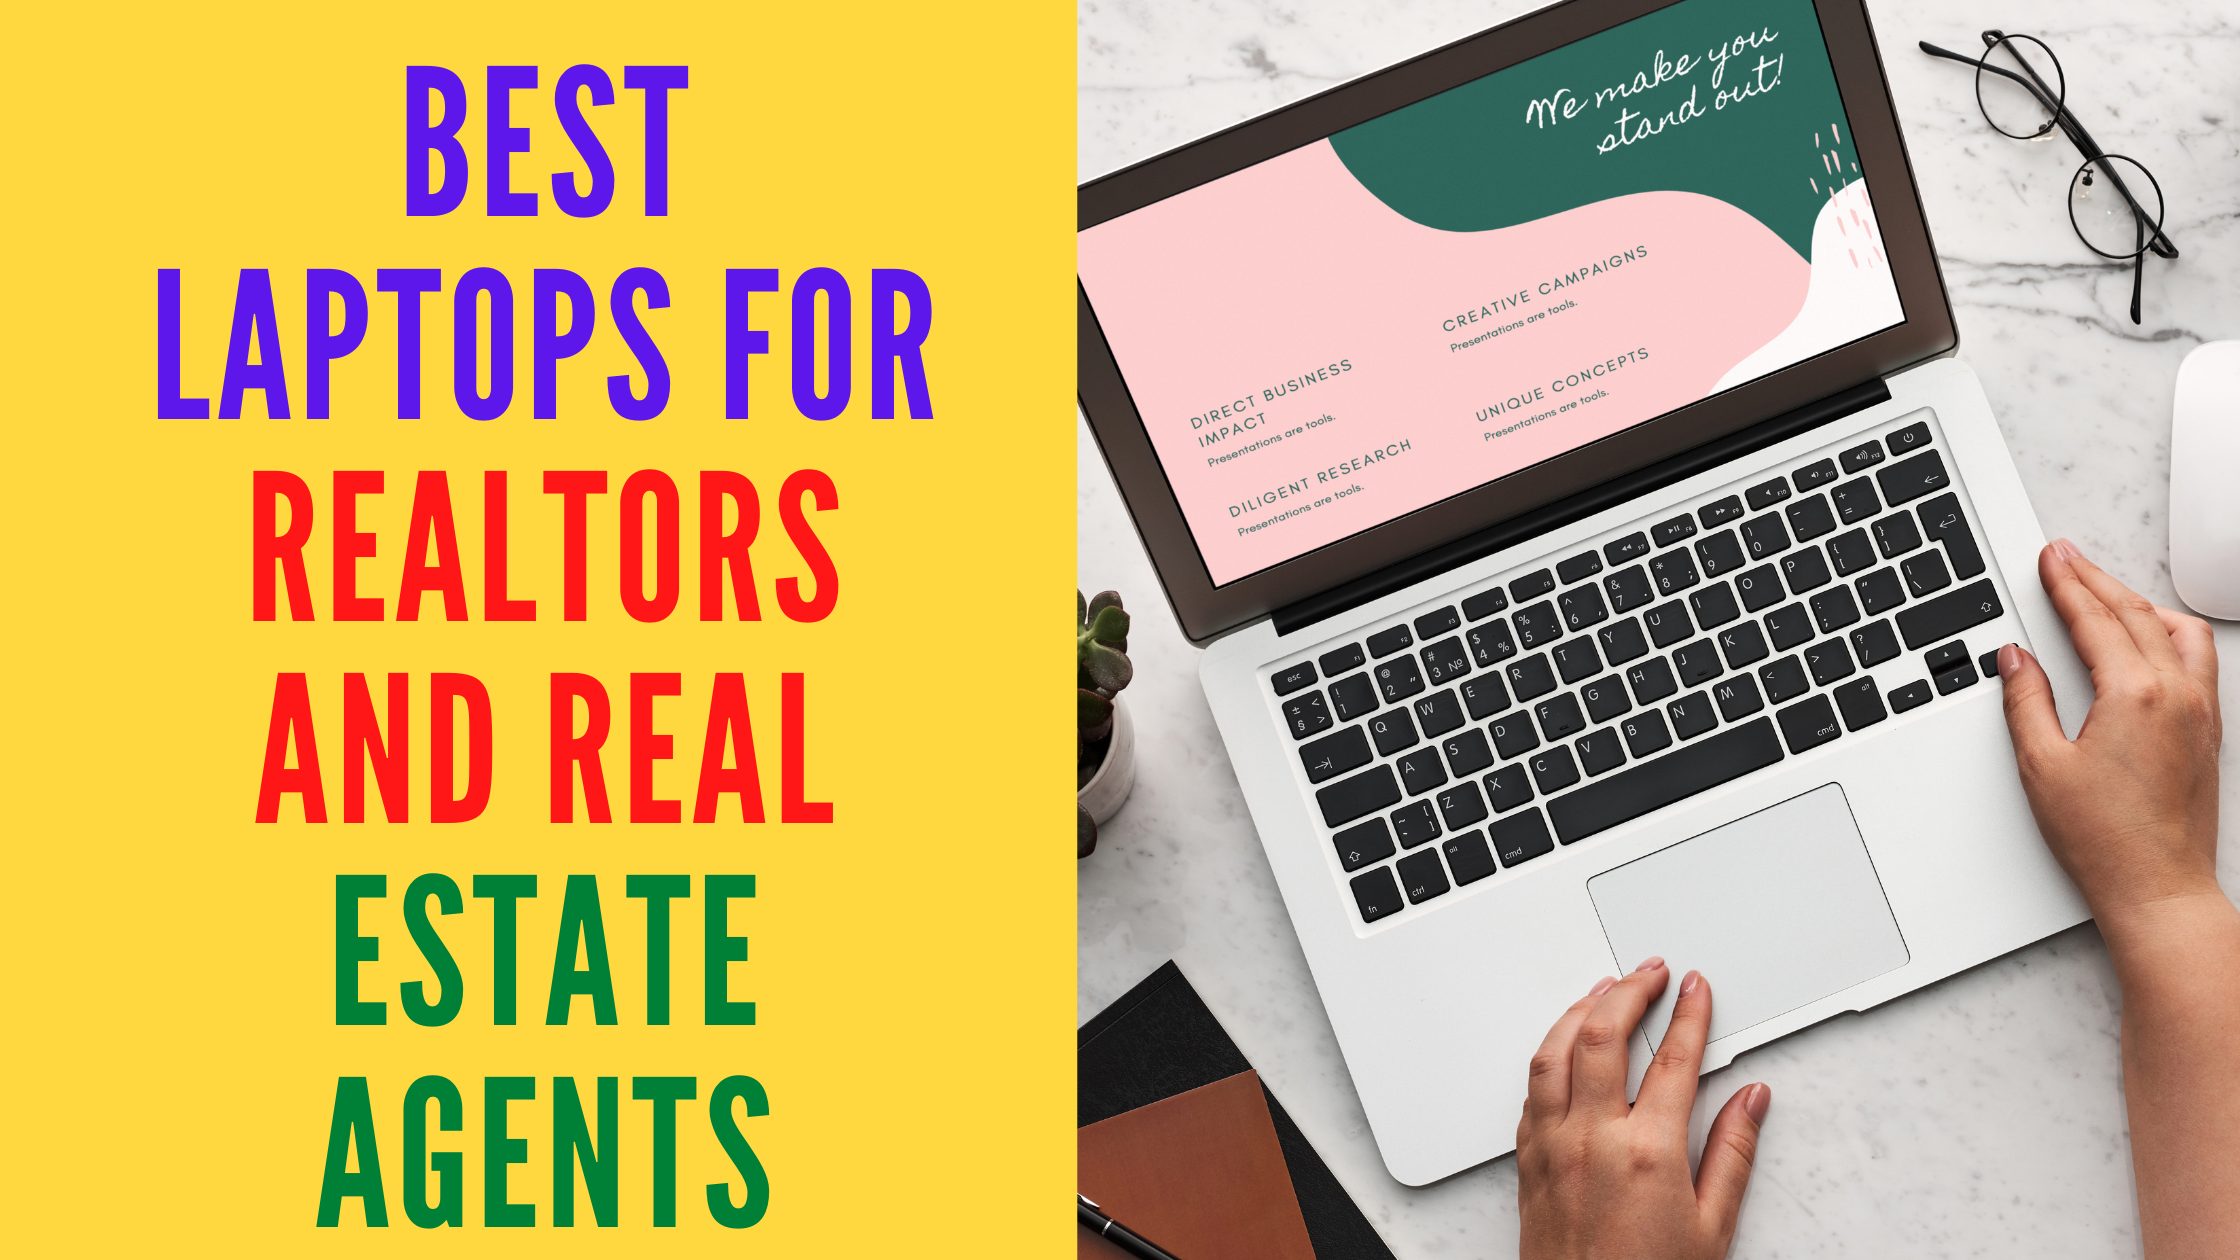 best laptops for realtors and real estate agents